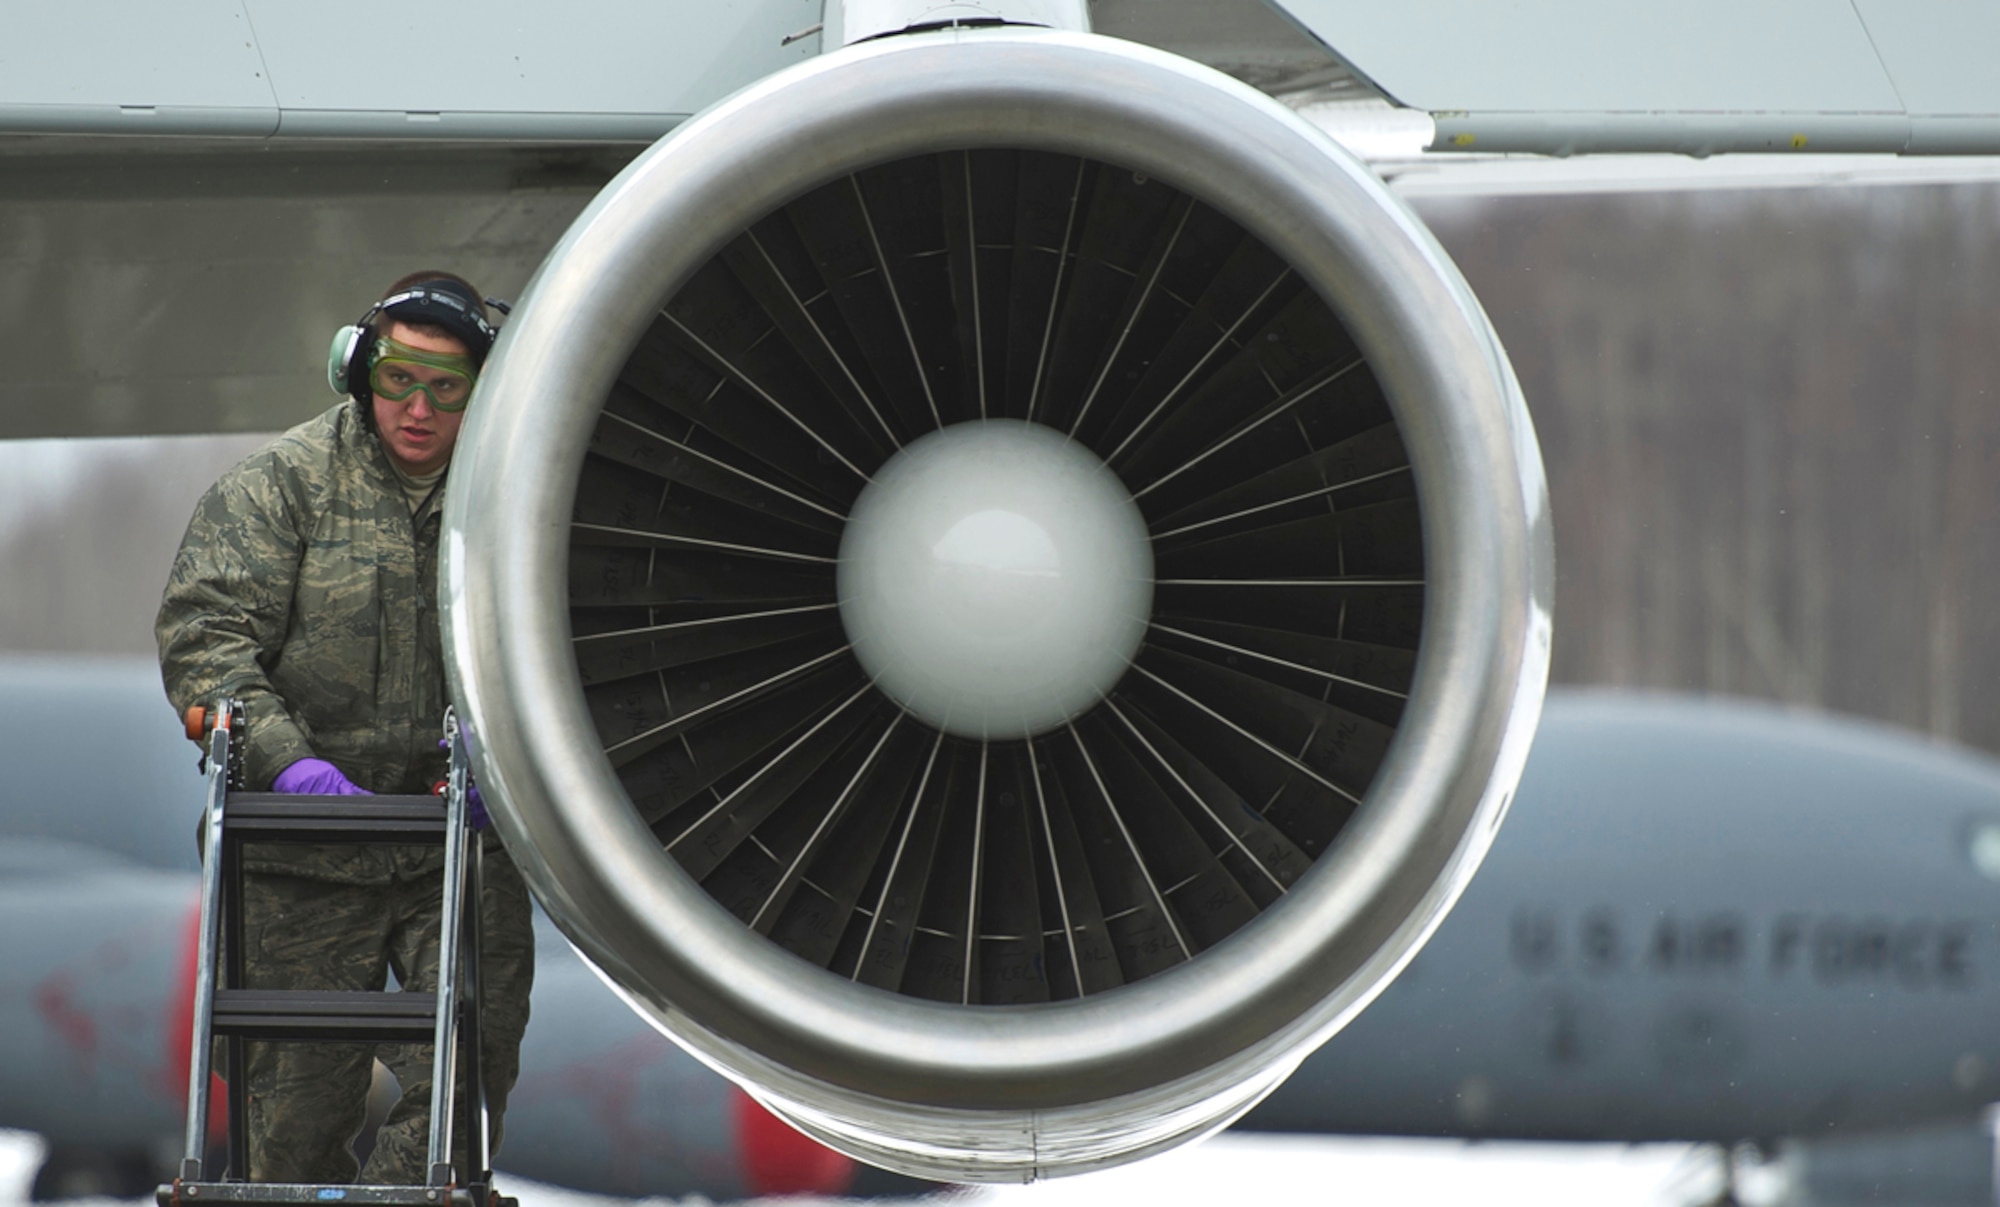 Senior Airman Kody Medrek, assigned to the 962nd Aircraft Maintenance Unit, checks an engine while performing maintenance on a E-3 Sentry Airborne Warning and Control System aircraft after a mission on Joint Base Elmendorf-Richardson, Alaska, Wednesday, March 17, 2014. (U.S. Air Force photo by Justin Connaher/Released)